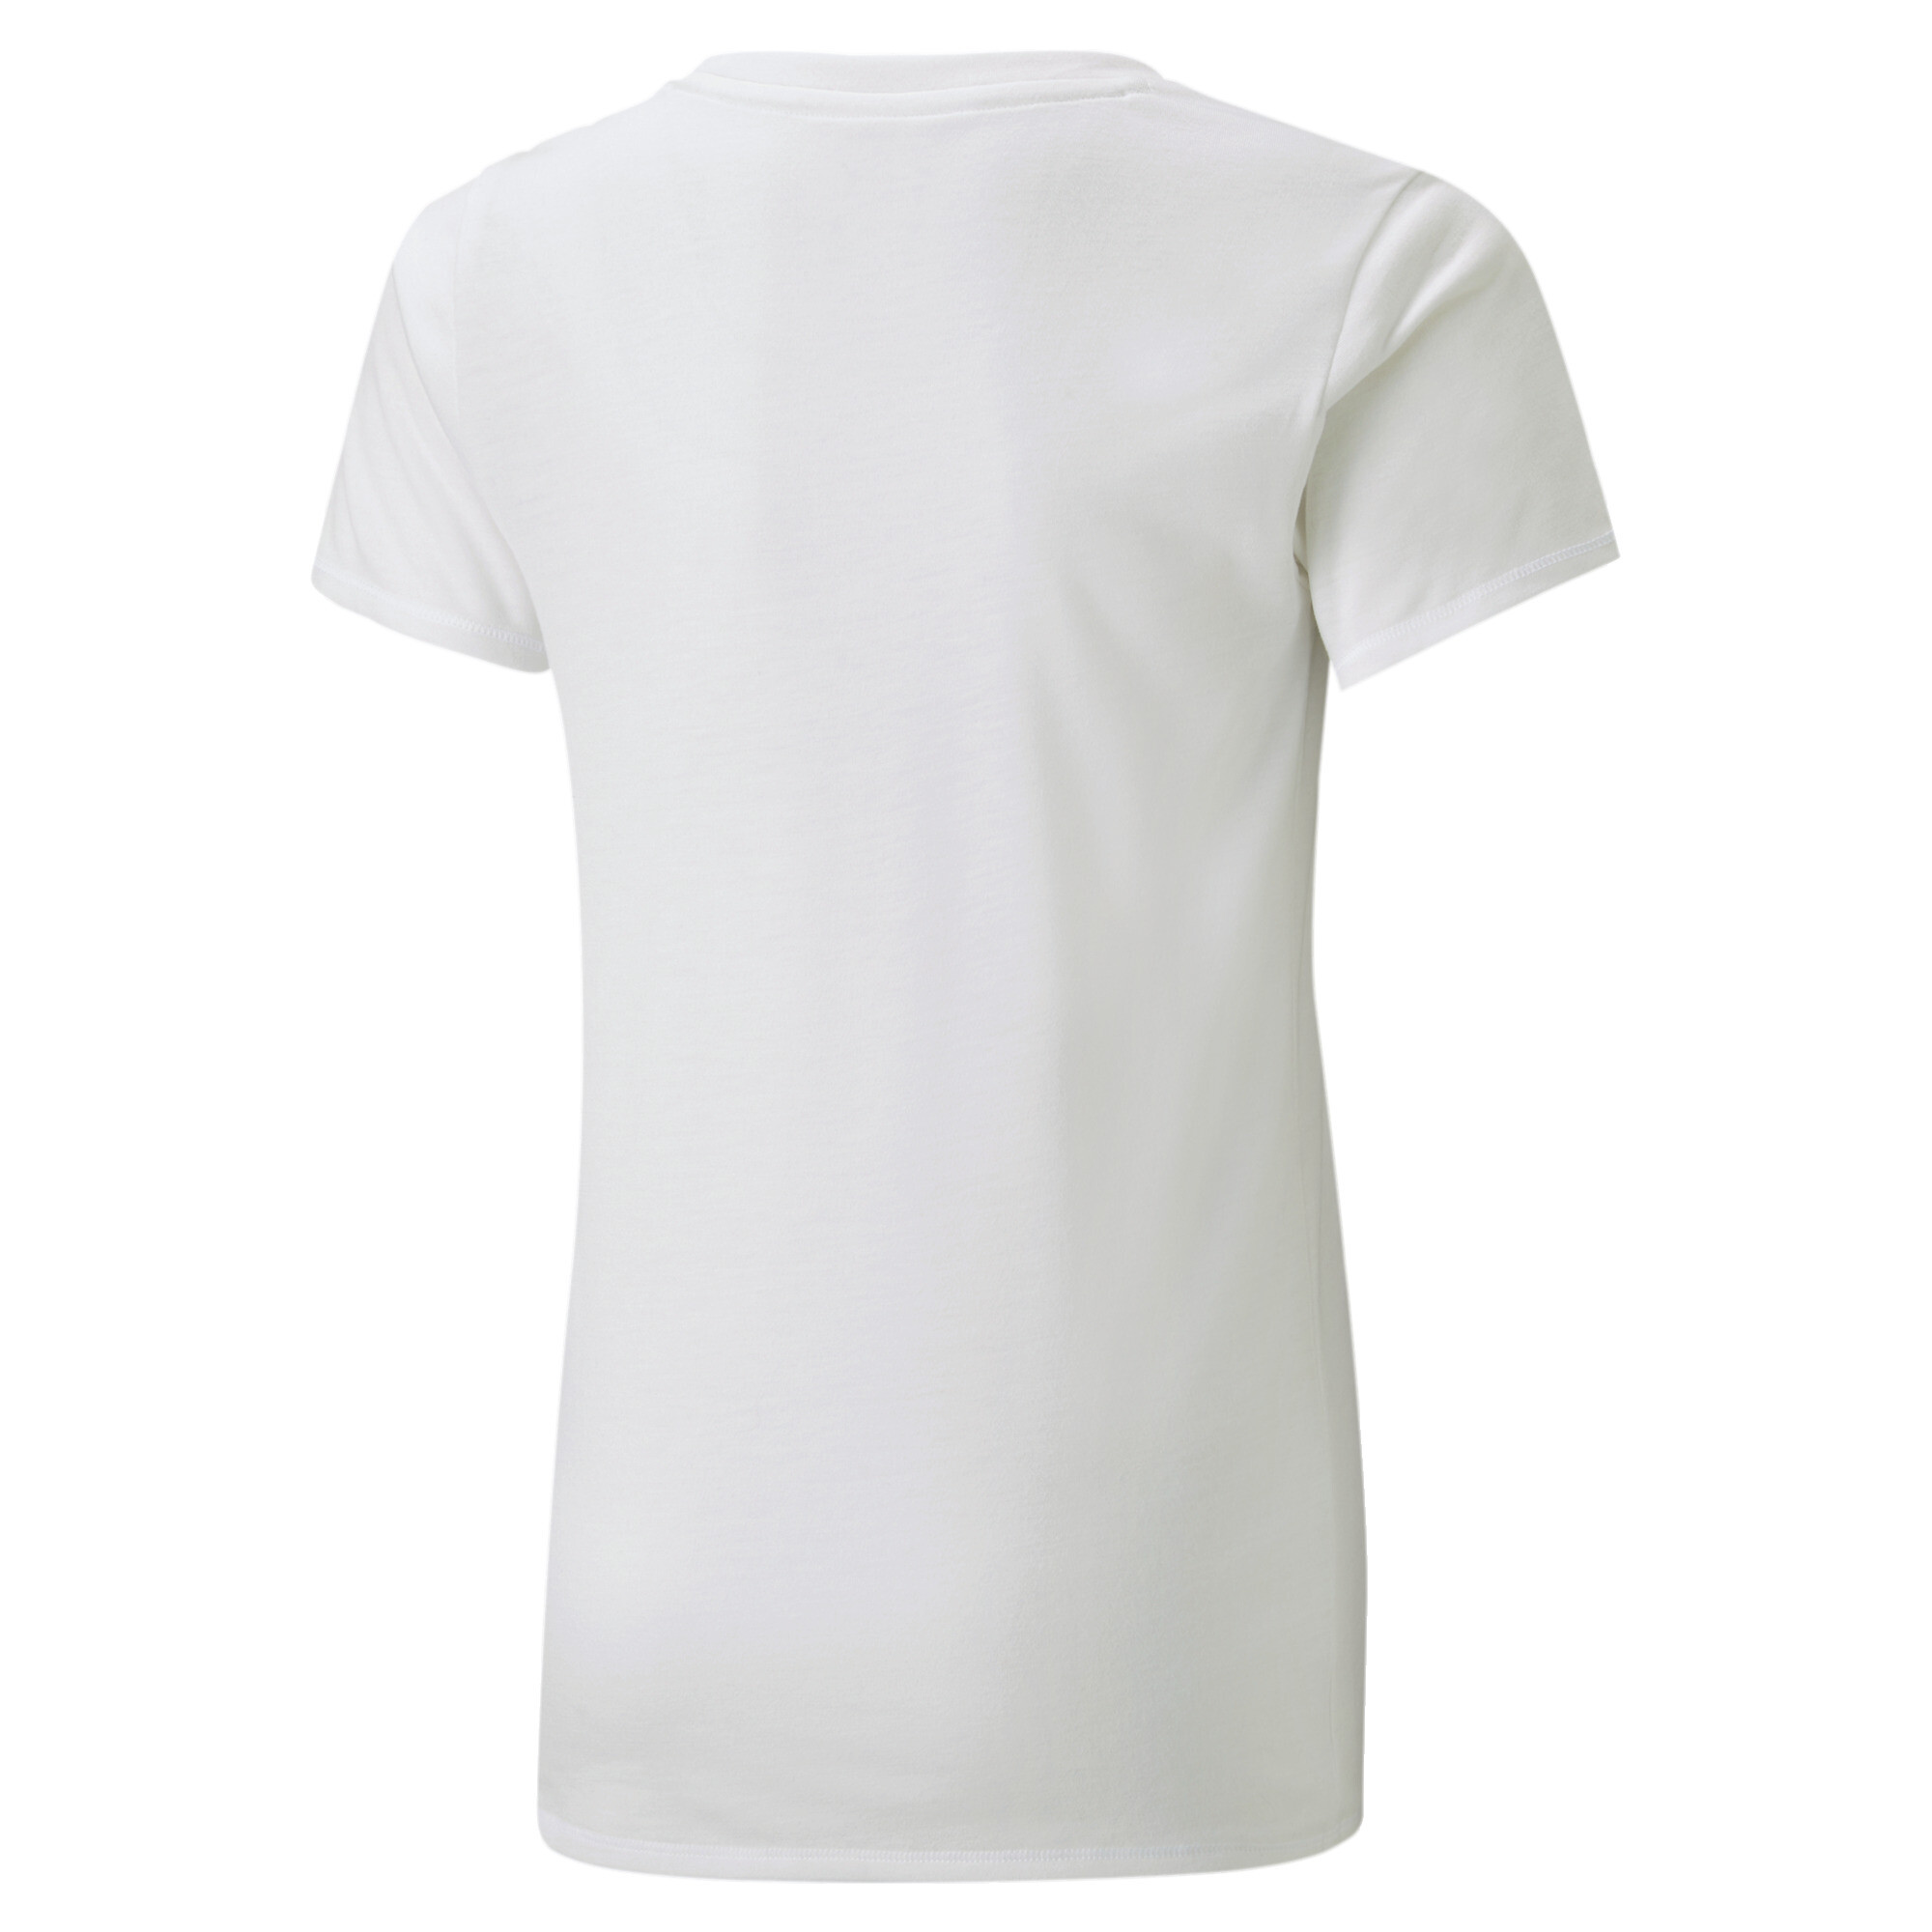 PUMA Favourites T-Shirt In White, Size 4-5 Youth